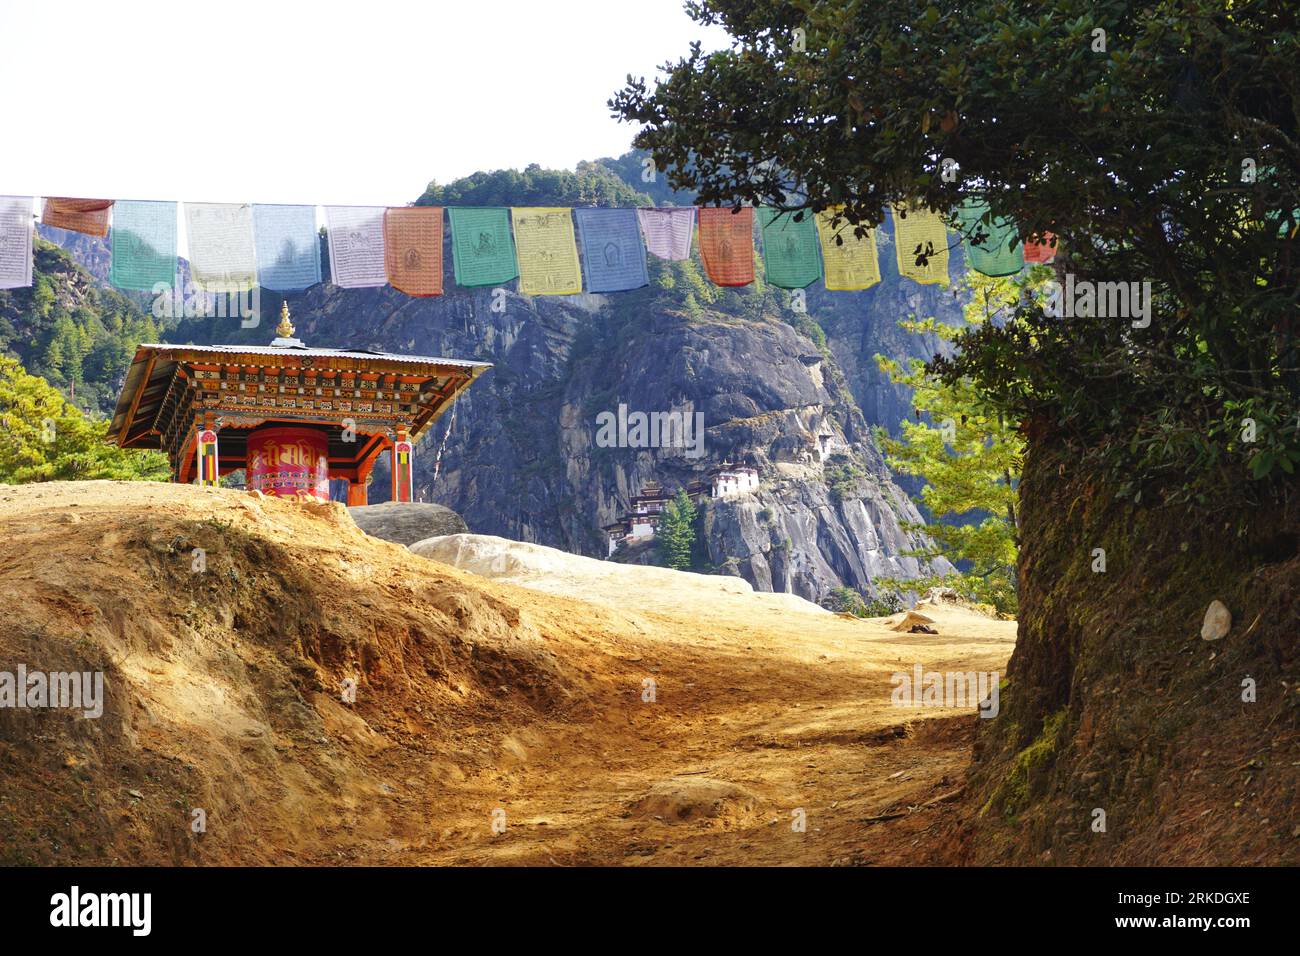 A prayer wheel pagoda to one side and colorful prayer flags above the trail frame a view of Tiger's Nest Monastery perched on the mountainside ahead Stock Photo